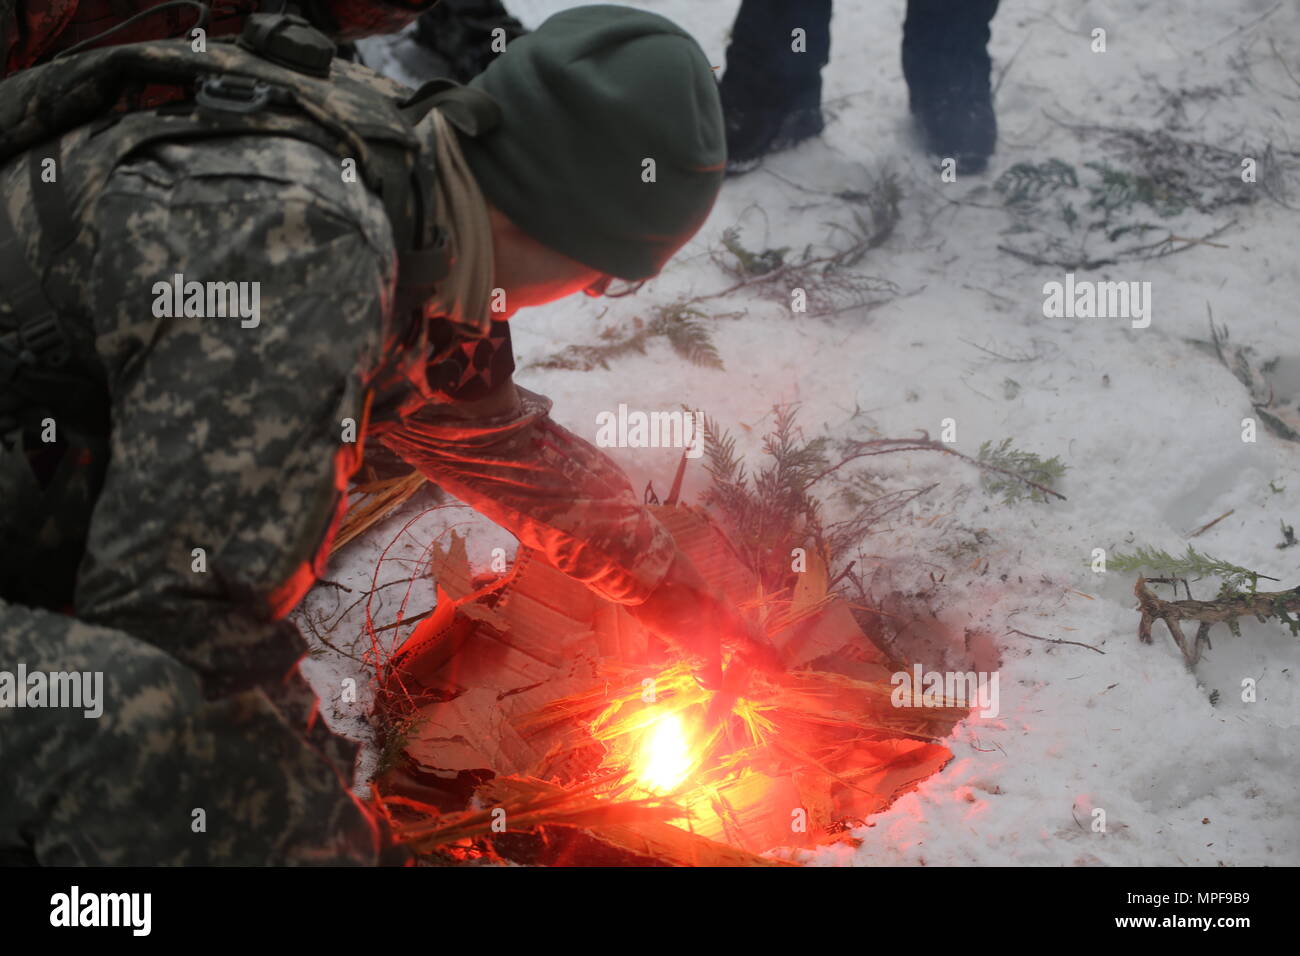 Soldiers from Delta Company, 898th Brigade Engineer Battalion build fires as part of their unit’s basic winter survival training, Feb. 11, 2017, Ranger Creek State Airport near Enumclaw, Wash. Building a fire using natural materials is a crucial skill in surviving the harsh elements of frigid climates. (U.S. Army National Guard Photo by Spc. Tyler Main) Stock Photo